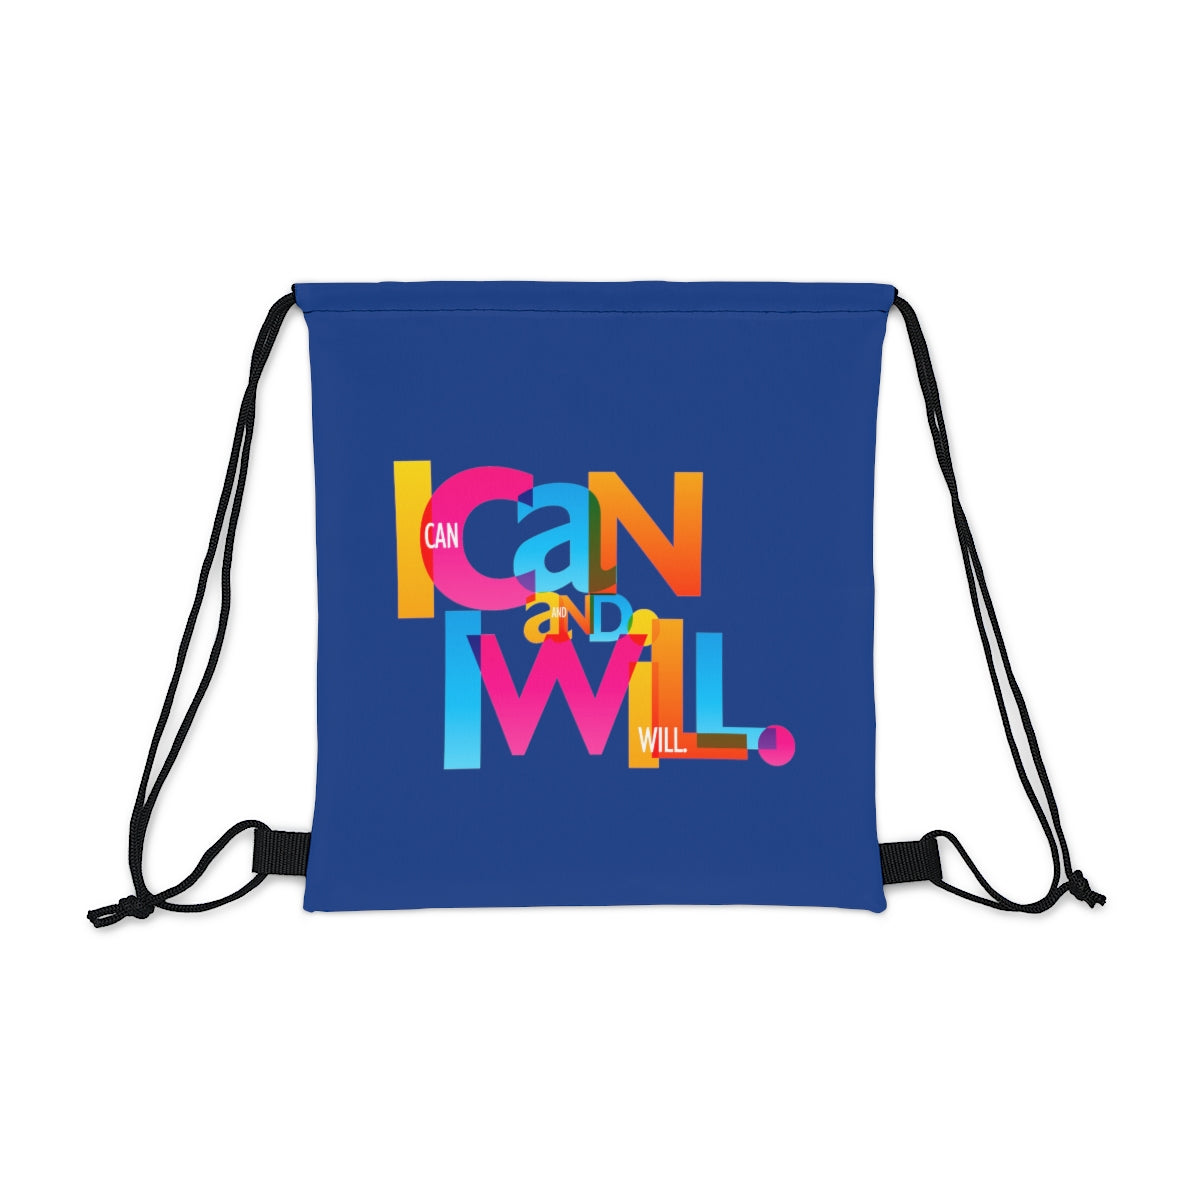 "I Can and I Will" Outdoor Drawstring Bag